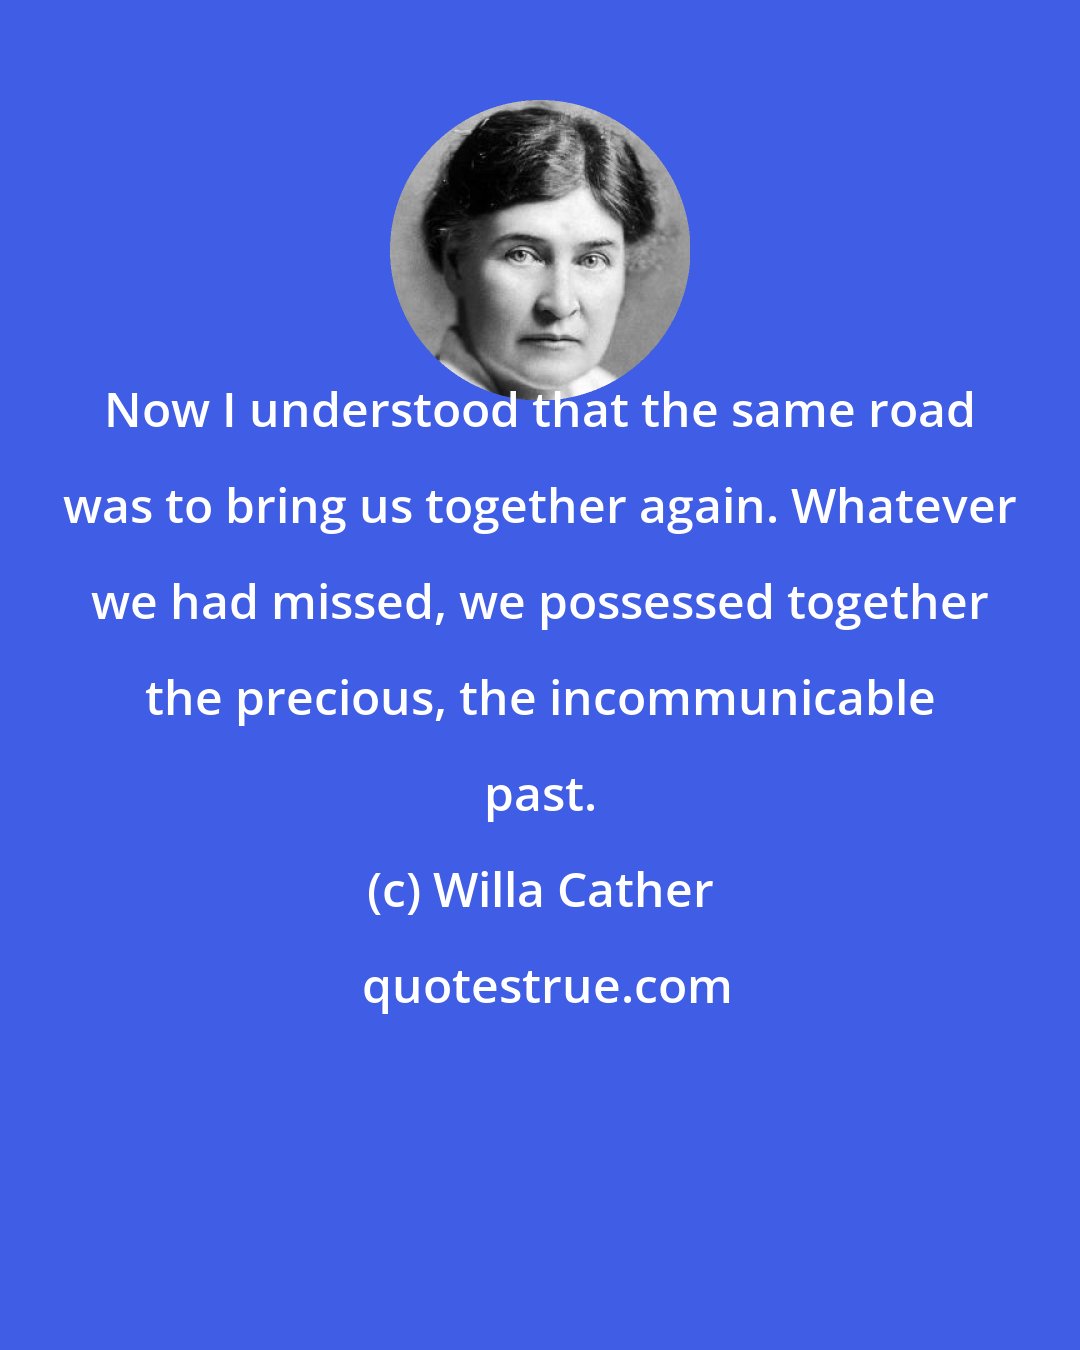 Willa Cather: Now I understood that the same road was to bring us together again. Whatever we had missed, we possessed together the precious, the incommunicable past.